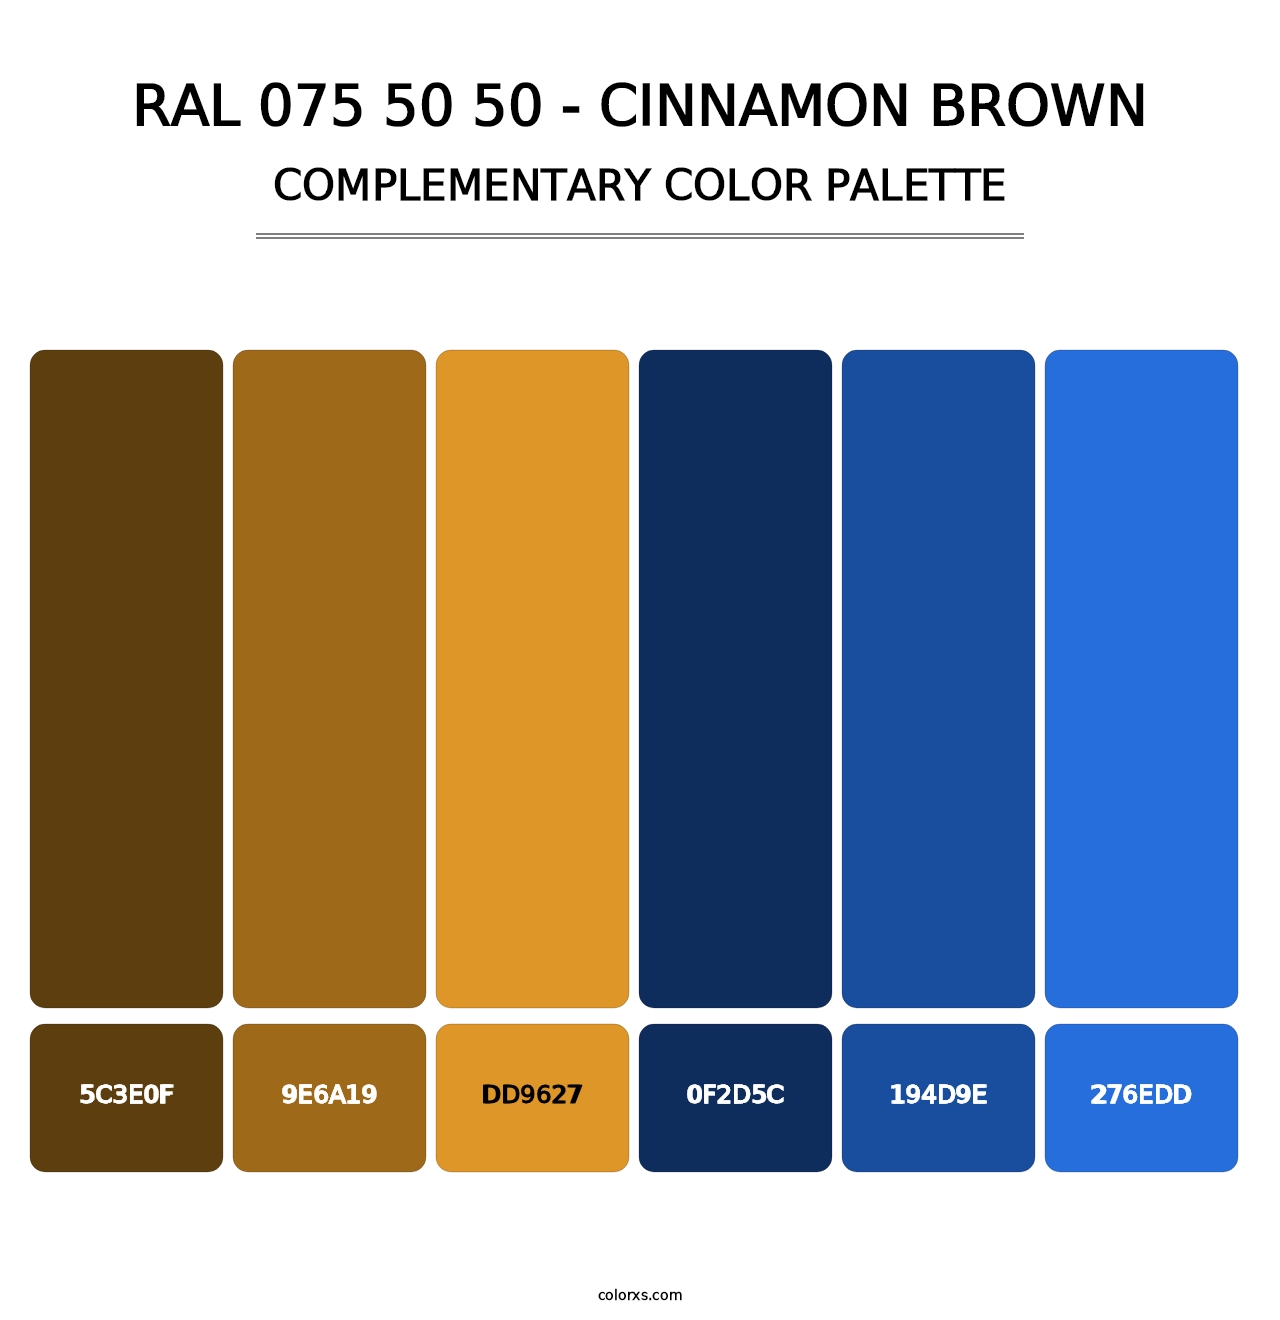 RAL 075 50 50 - Cinnamon Brown - Complementary Color Palette